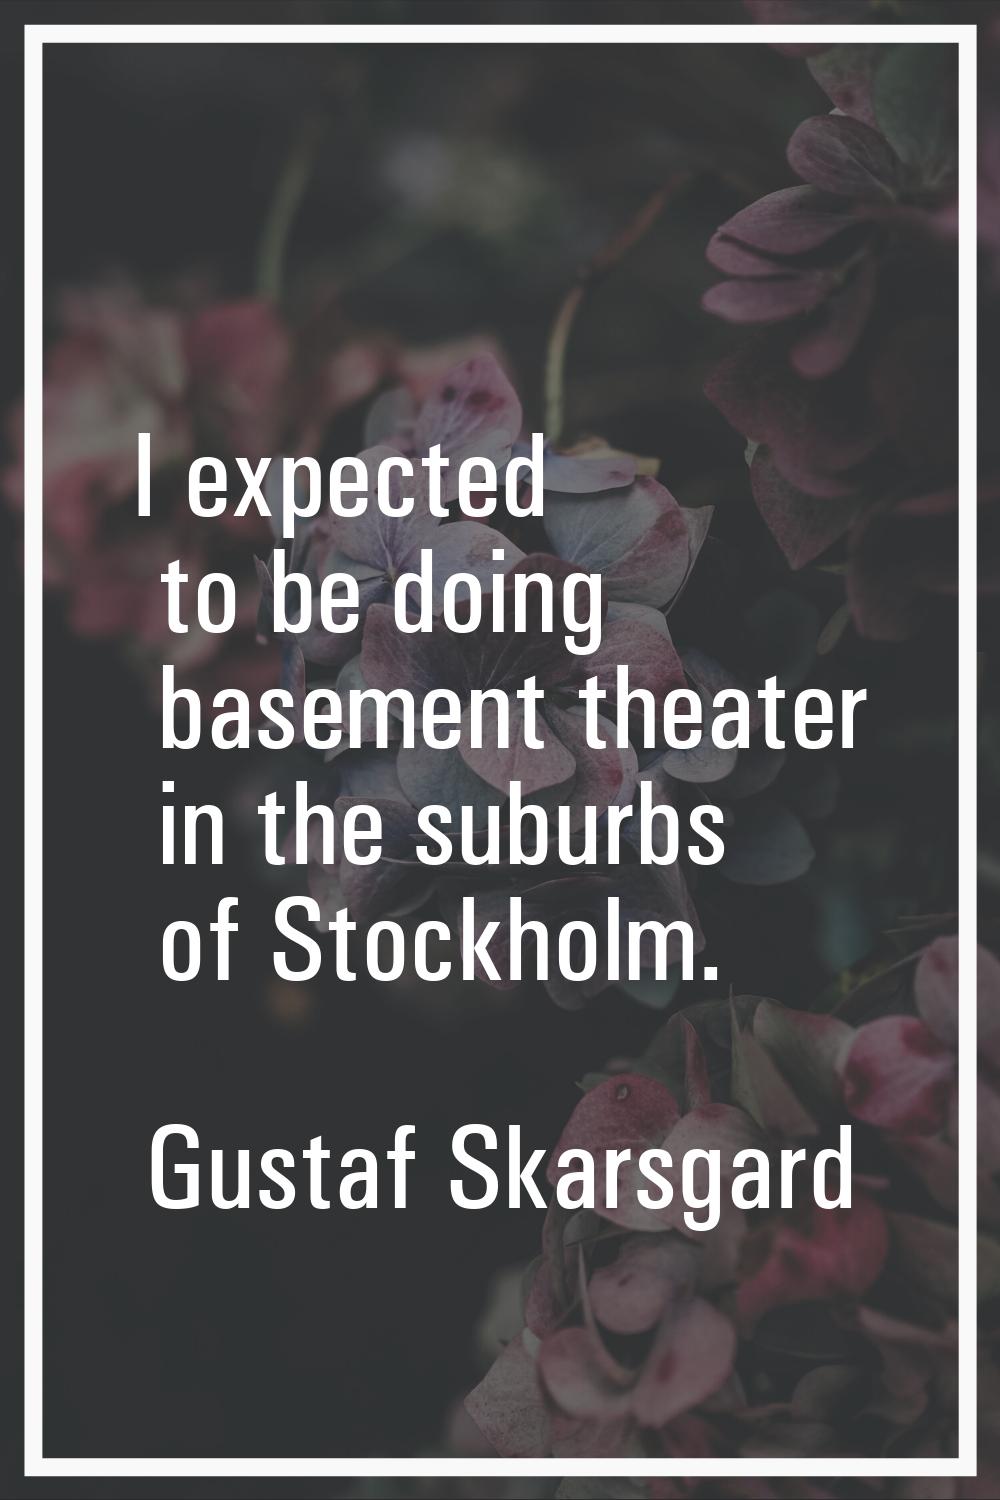 I expected to be doing basement theater in the suburbs of Stockholm.